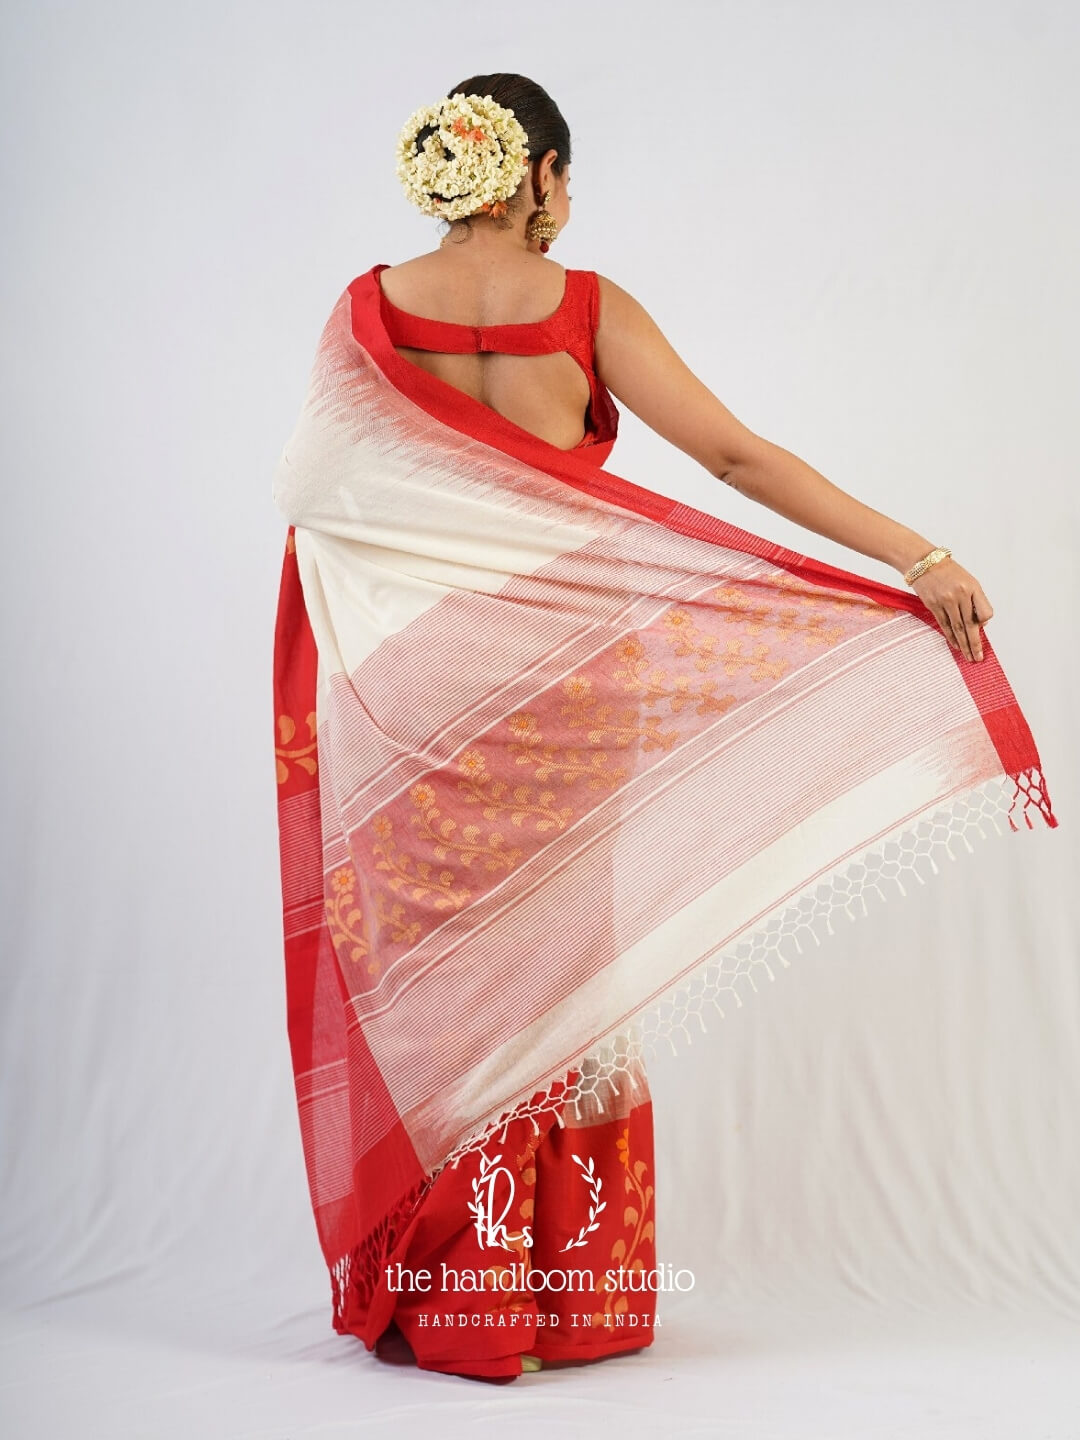 Offwhite cotton jamdani saree with rich red borders